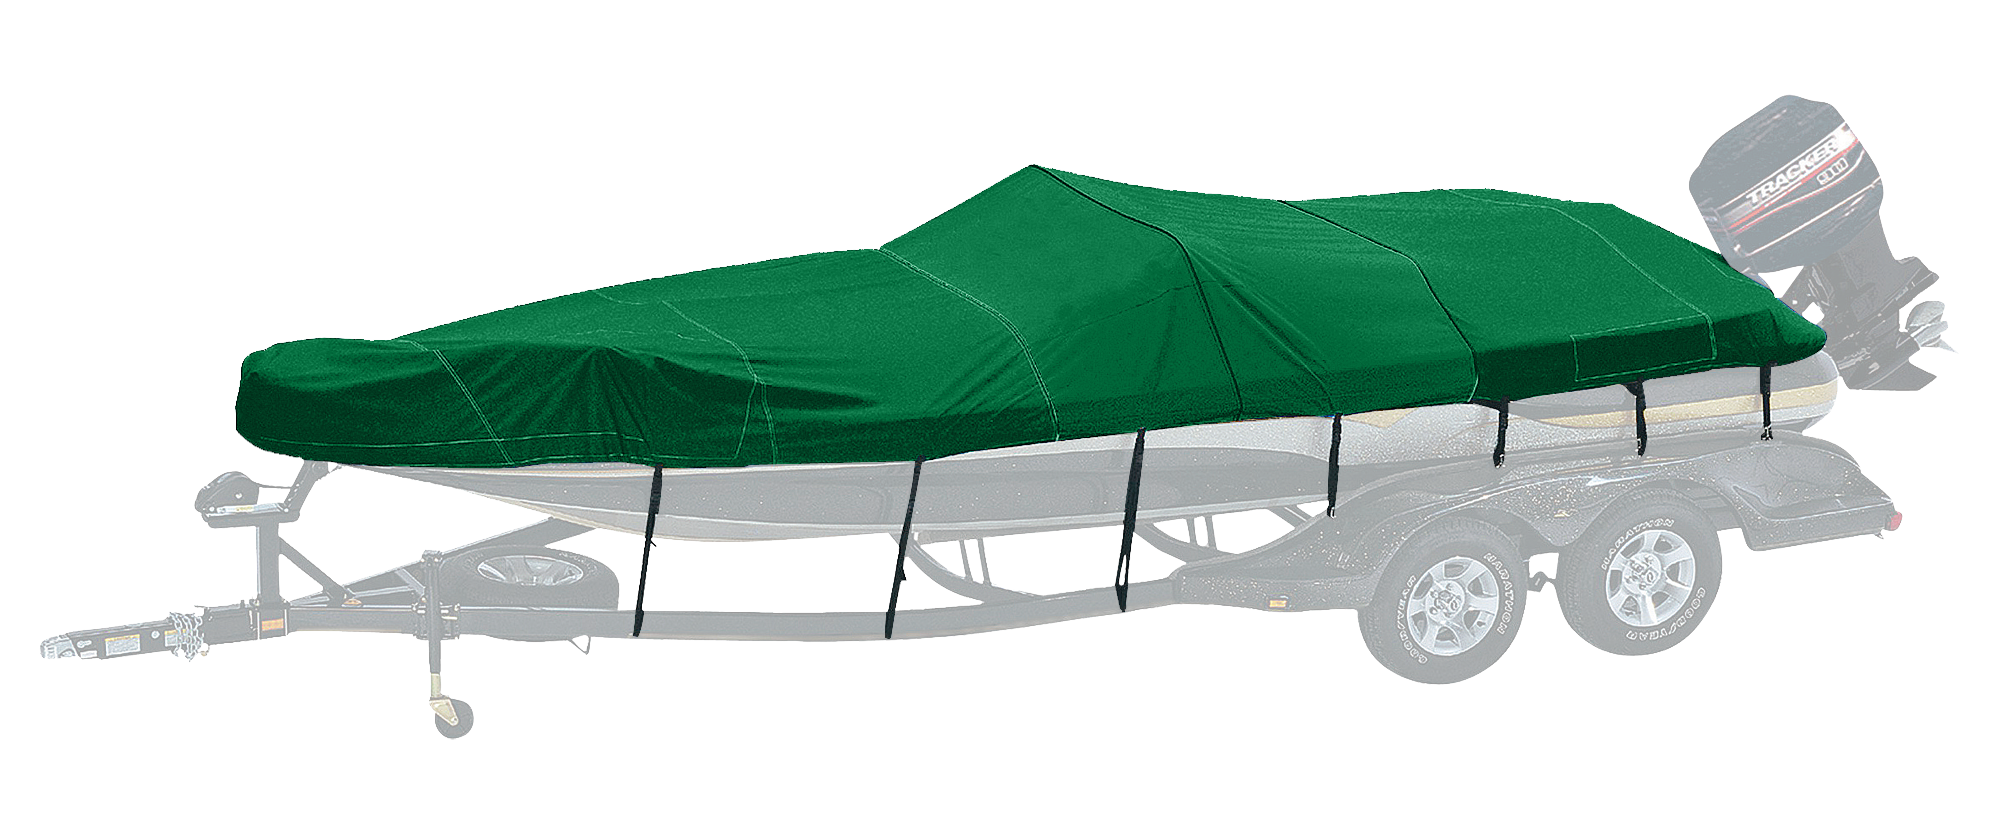 Bass Pro Shops Exact Fit Boat Cover by Westland - Tahoe Boats - 2002-2004 204 Deckboat I/O - Forest Green